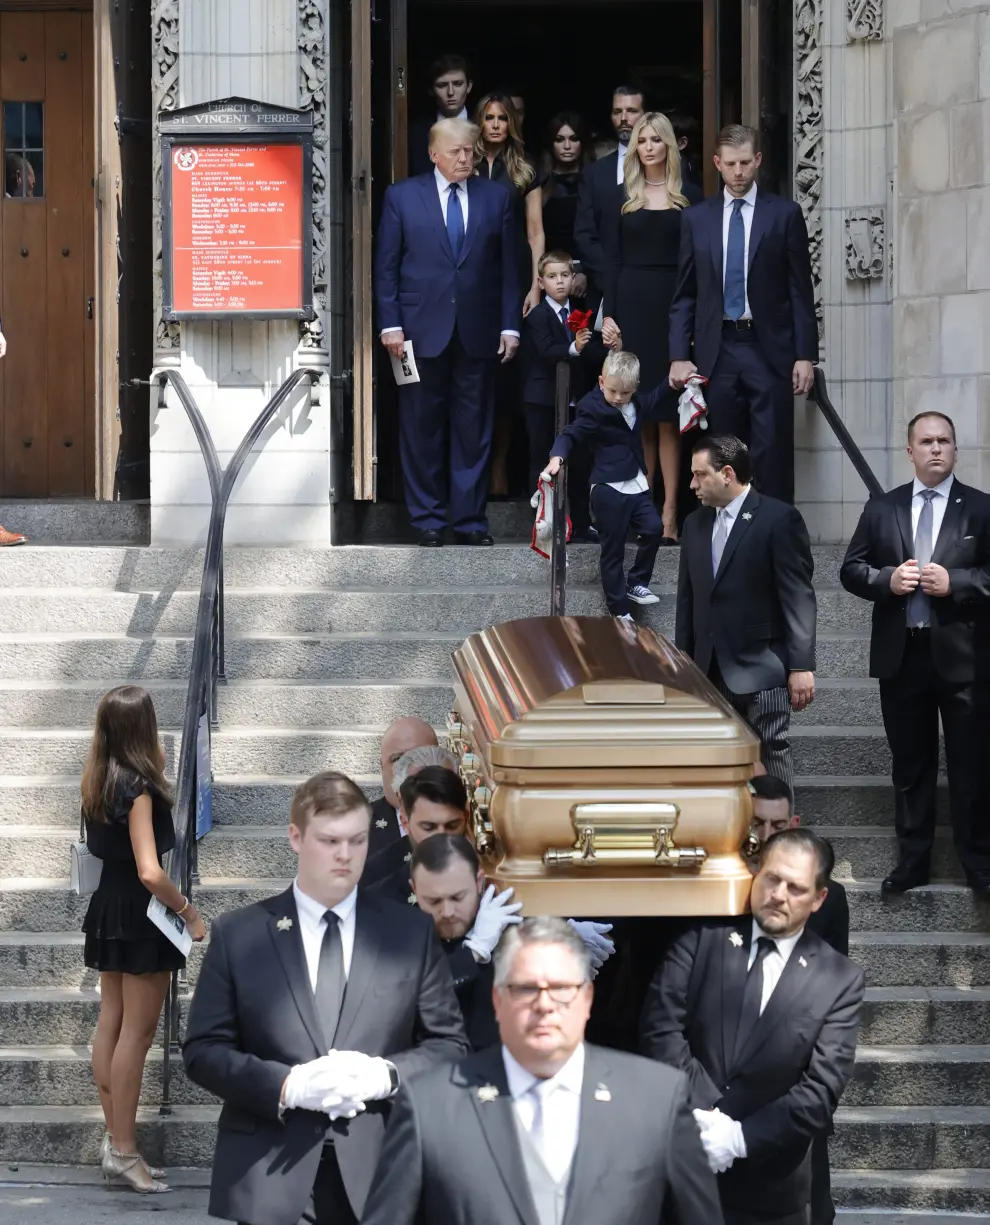 New York (United States), 20/07/2022.- Former US President Donald (Top-Left) looks at his daughter Ivanka (C) and son Eric as they walk behind the coffin with the remains of Ivana Trump at St. Vincent Ferrer Roman Catholic Church in New York, New York, USA, 20 July 2022. Ivana Trump, the first wife of former President Donald Trump, has died at age 73 on 14 July 2022. (Estados Unidos, Nueva York) EFE/EPA/JASON SZENES
 USA PEOPLE IVANA TRUMP FUNERAL